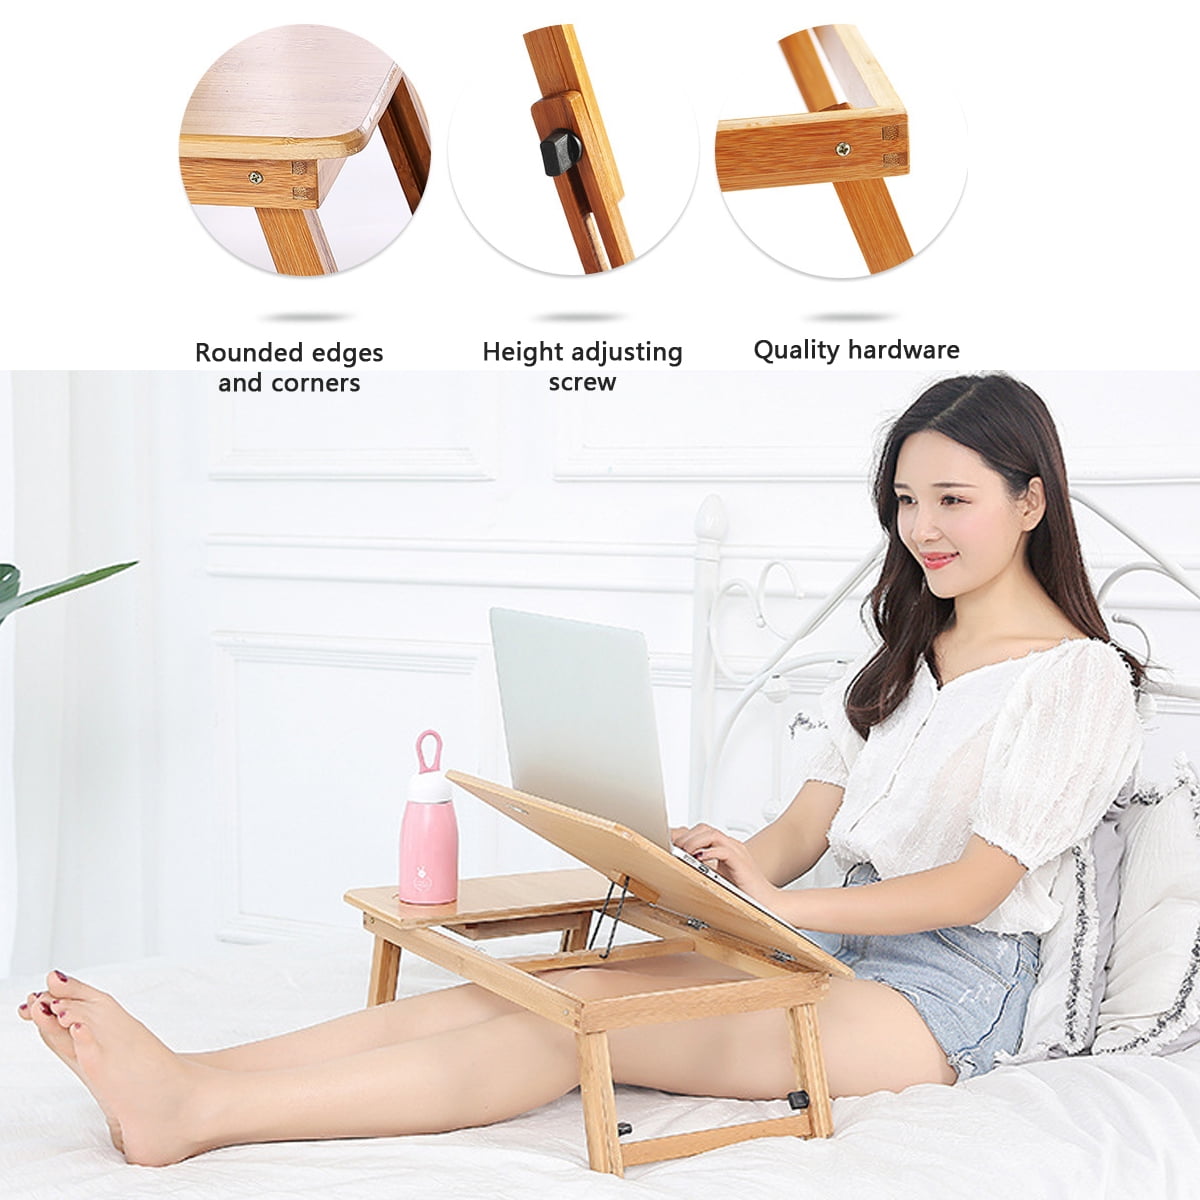 EIGSO Laptop Bed Desk Table Tray with Foldable Pull Down Legs and Storage Drawer Multi-Position Adjustable Tilt Surface for Computer iPad Book Study Writing Reading and Eating 